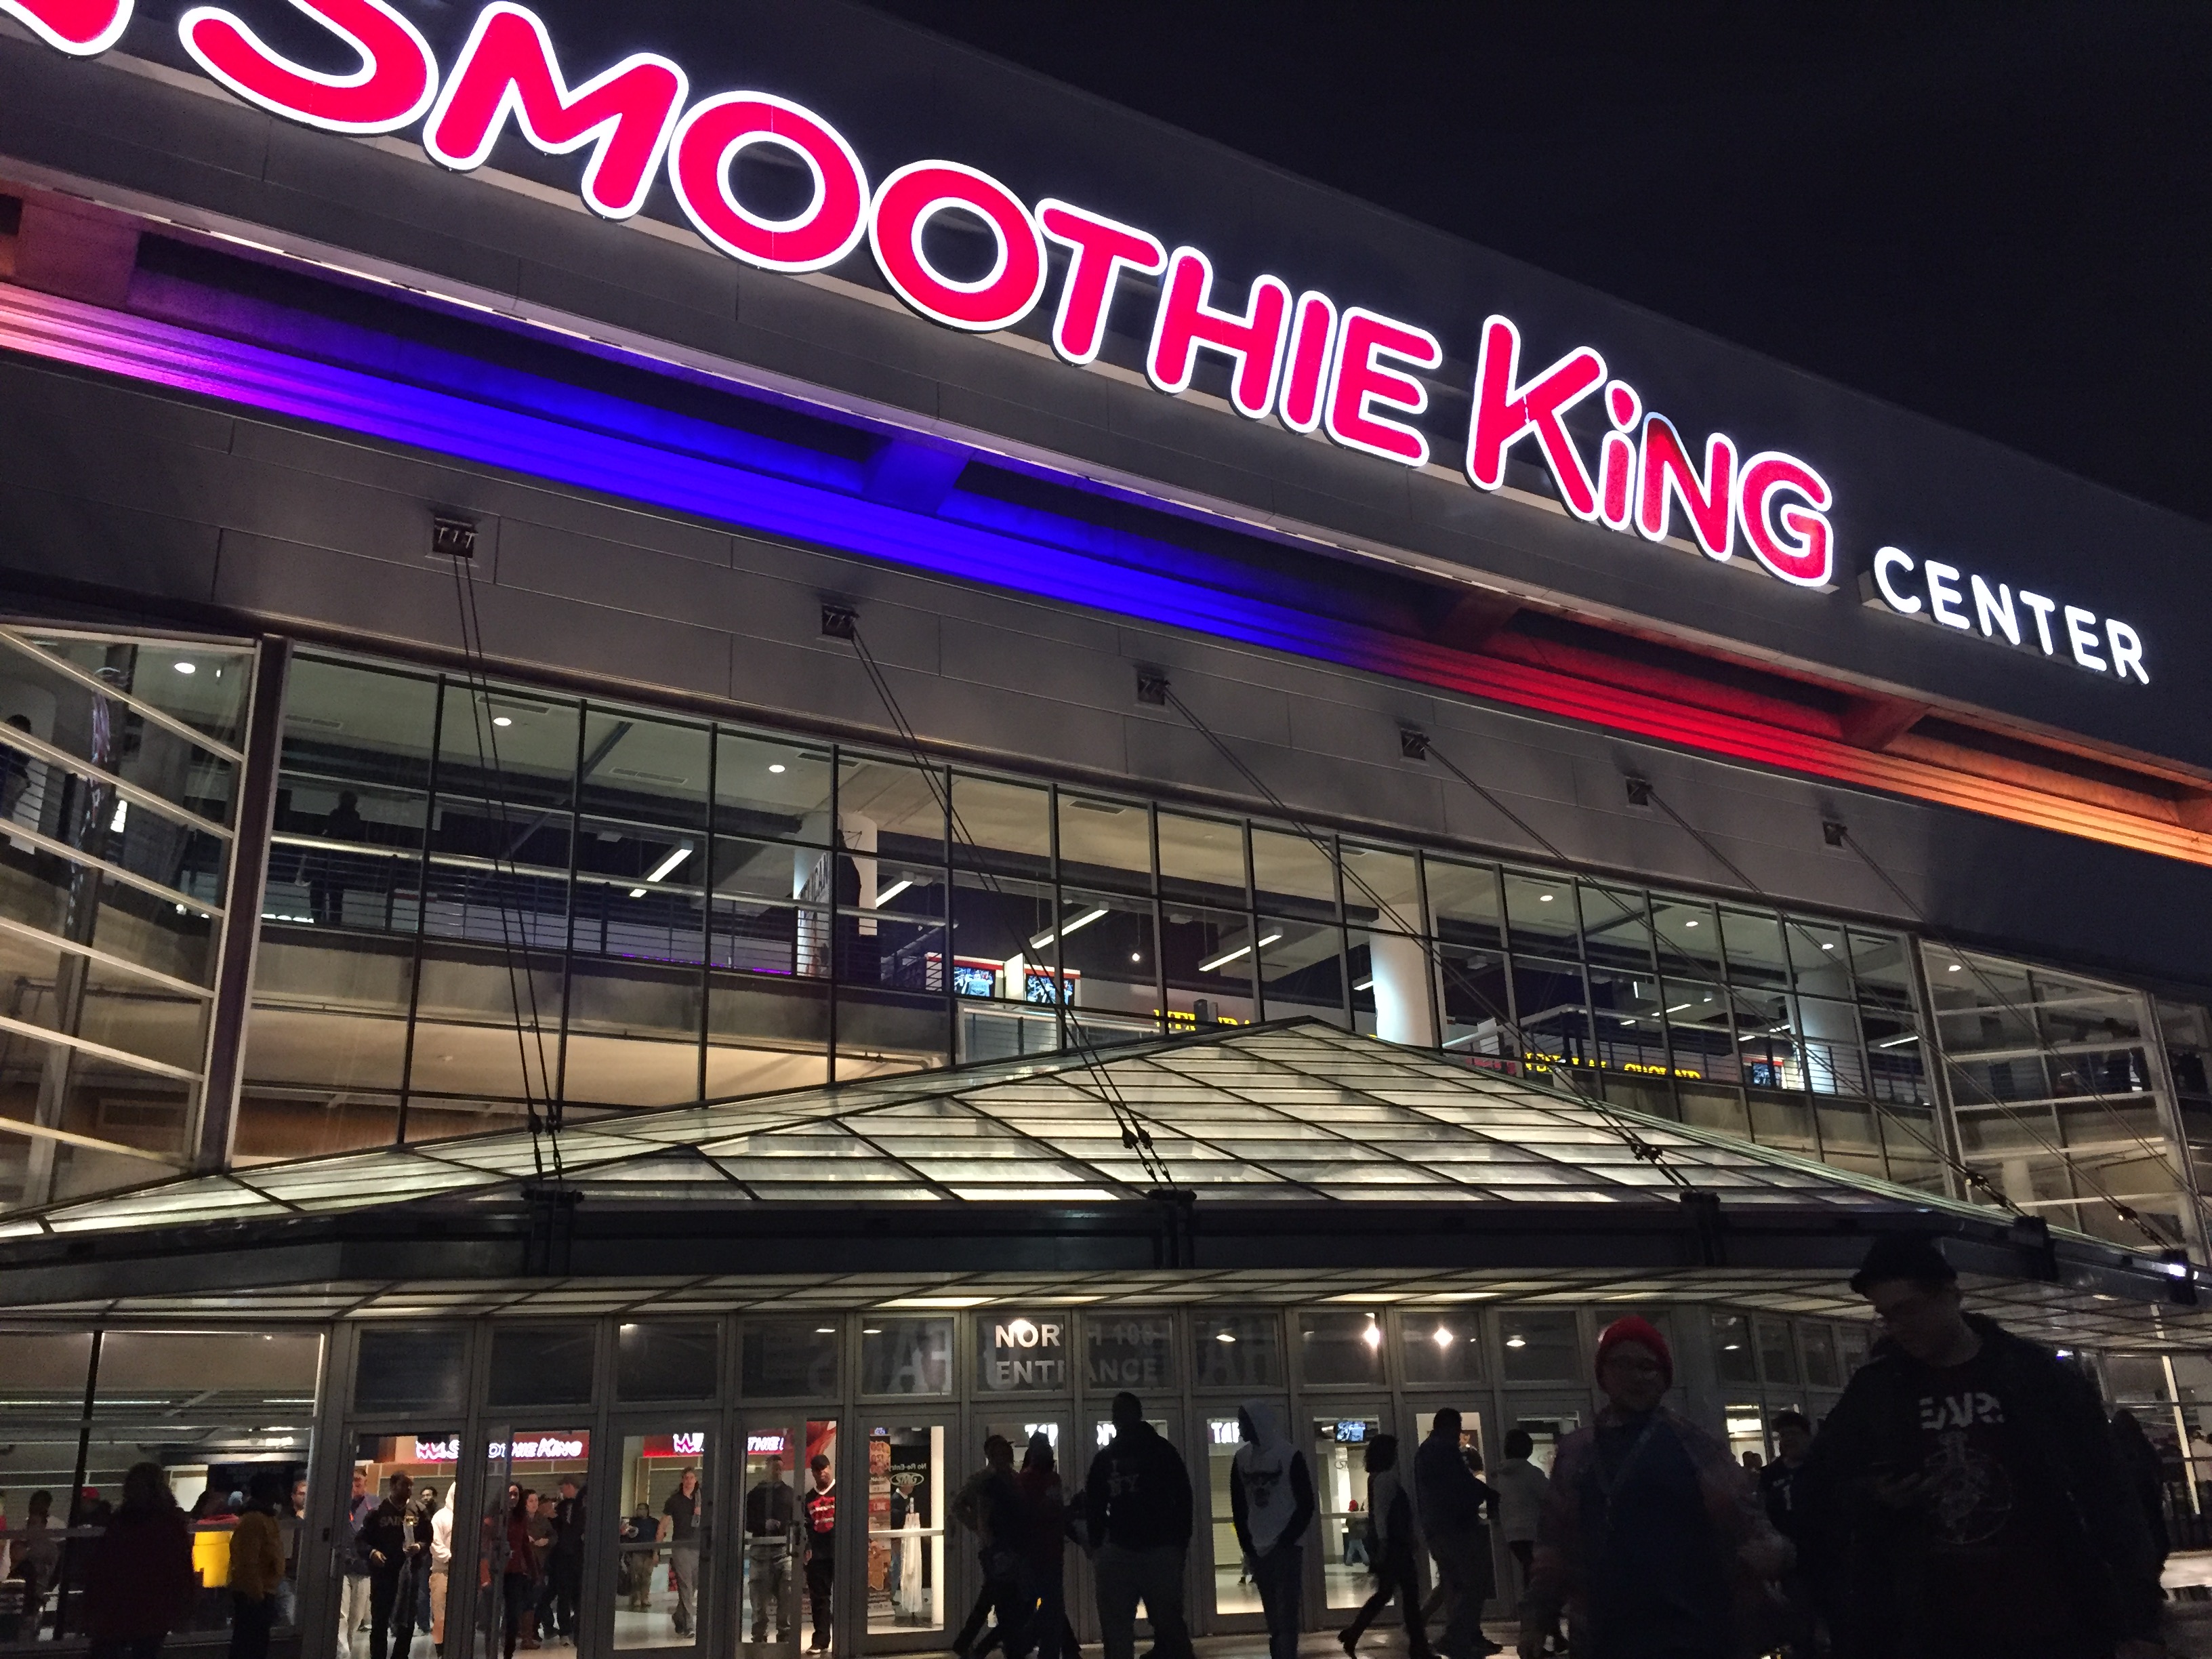 The Smoothie King Center: A Multi-Purpose Indoor Arena In New